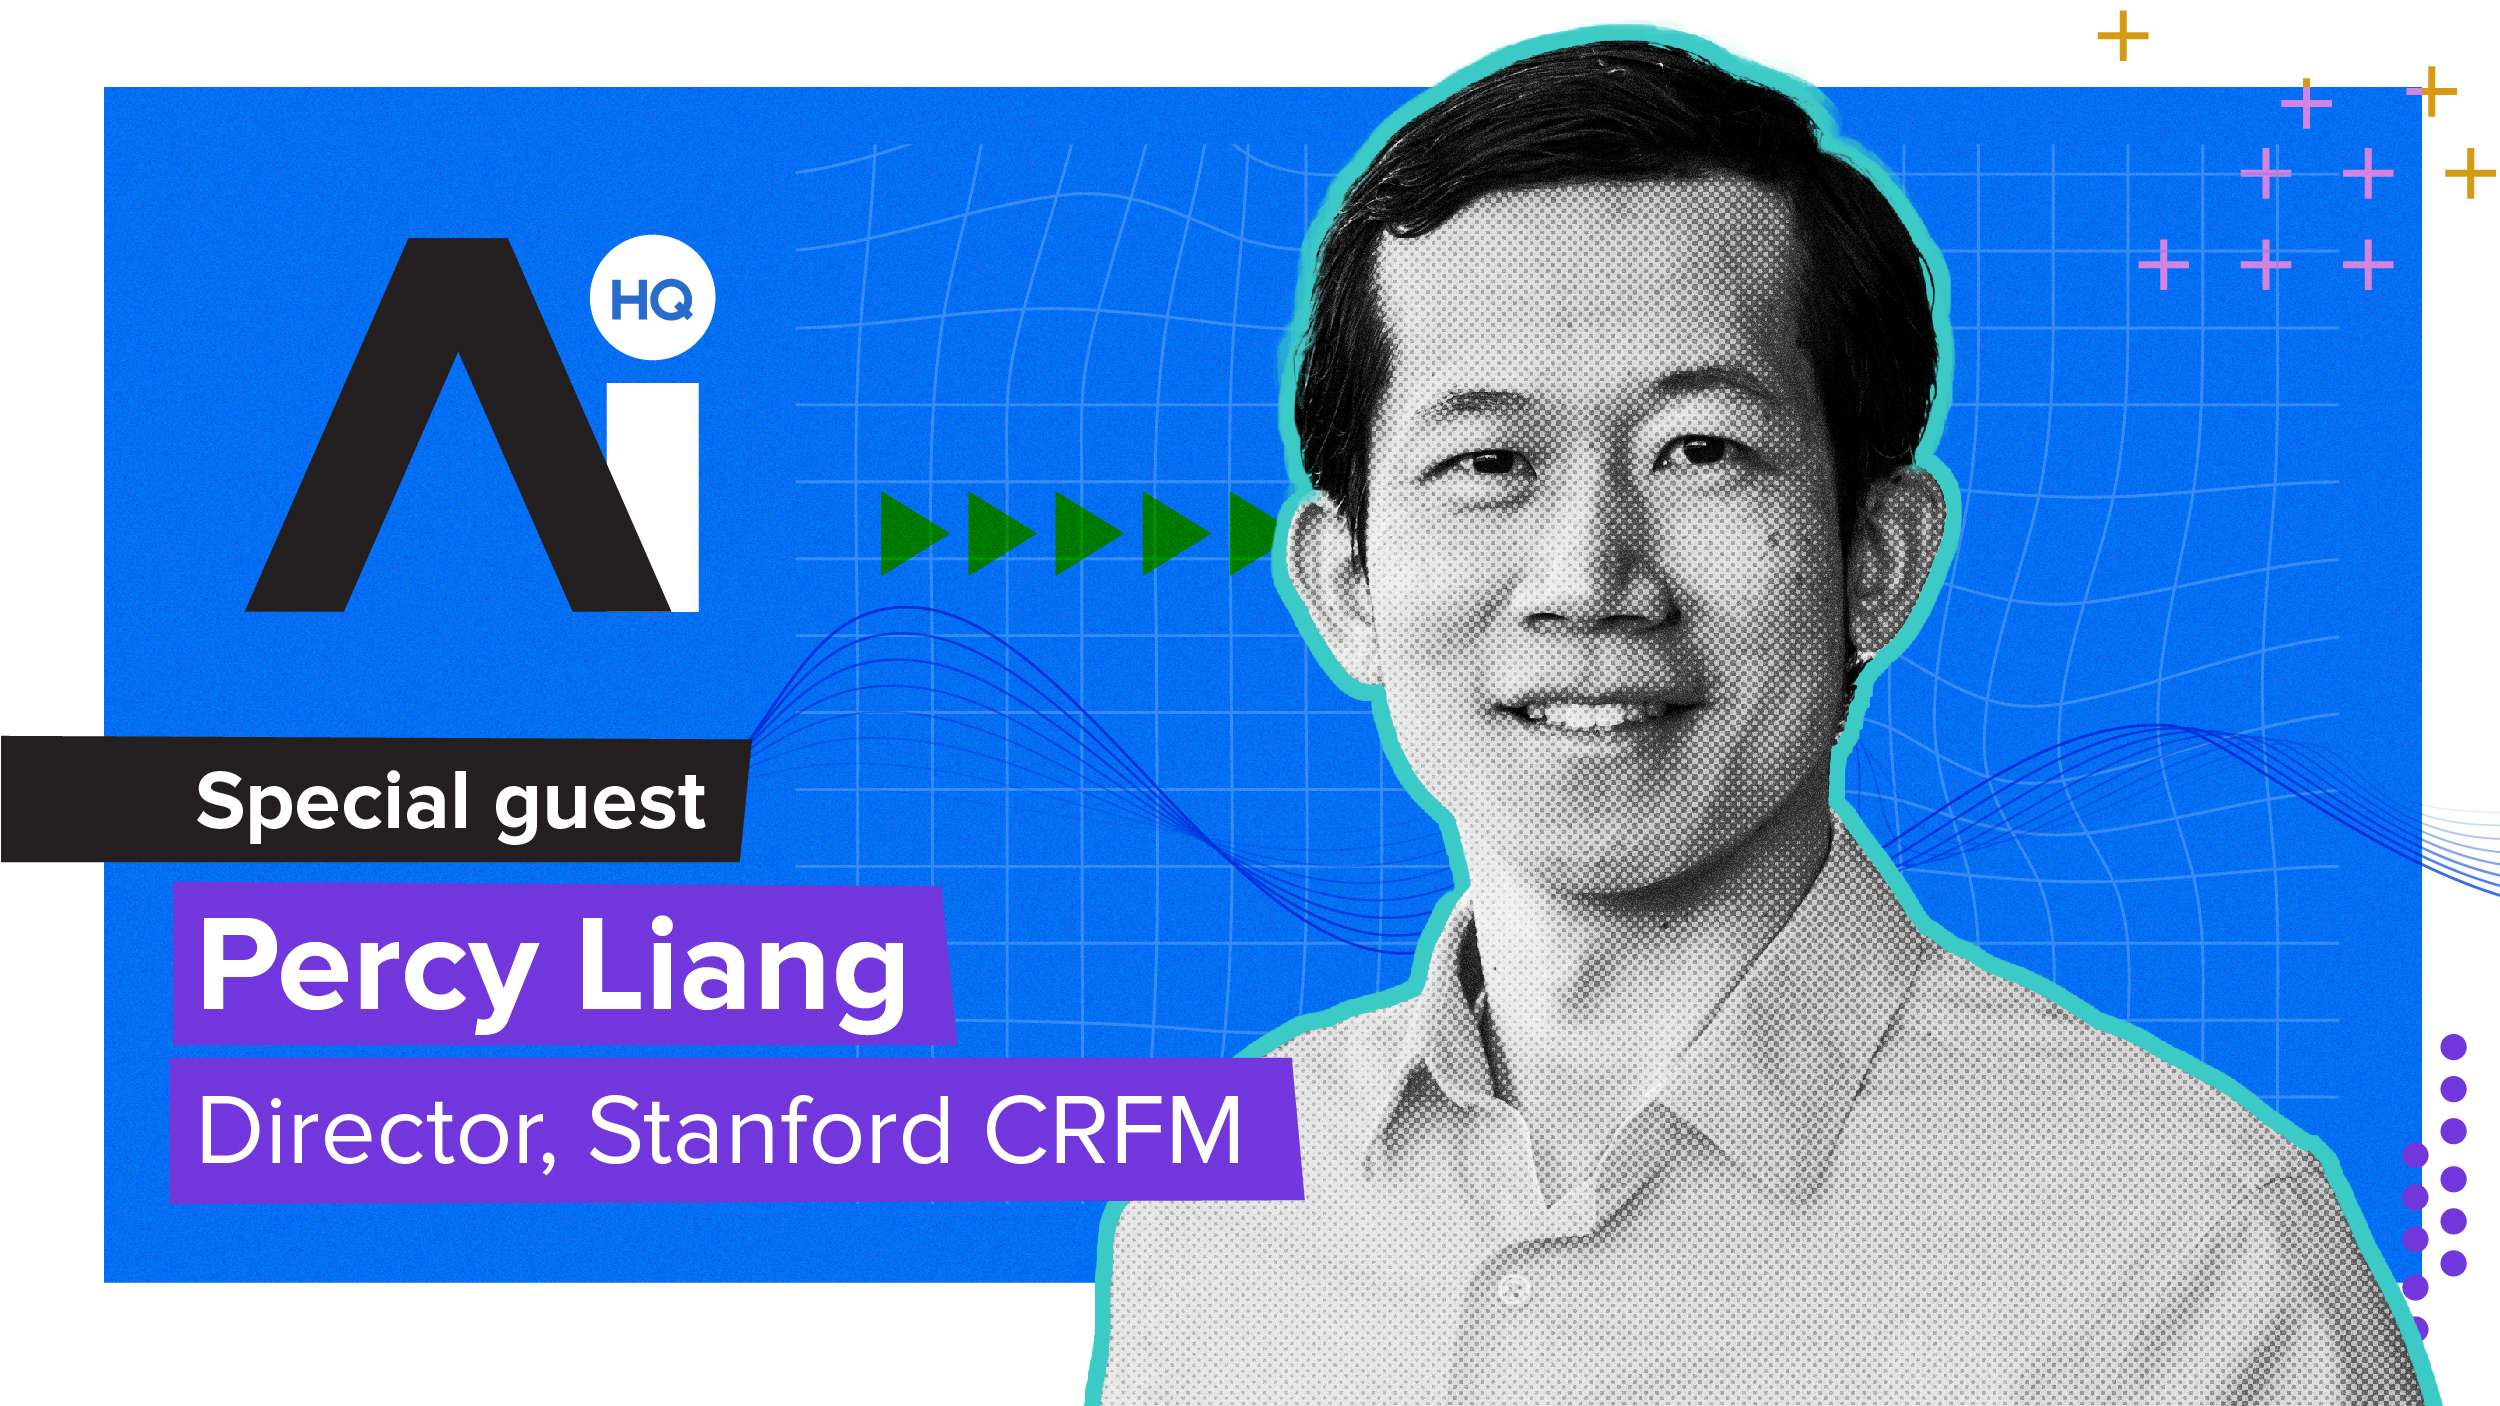 AI HQ: Director at Stanford’s CRFM Percy Liang